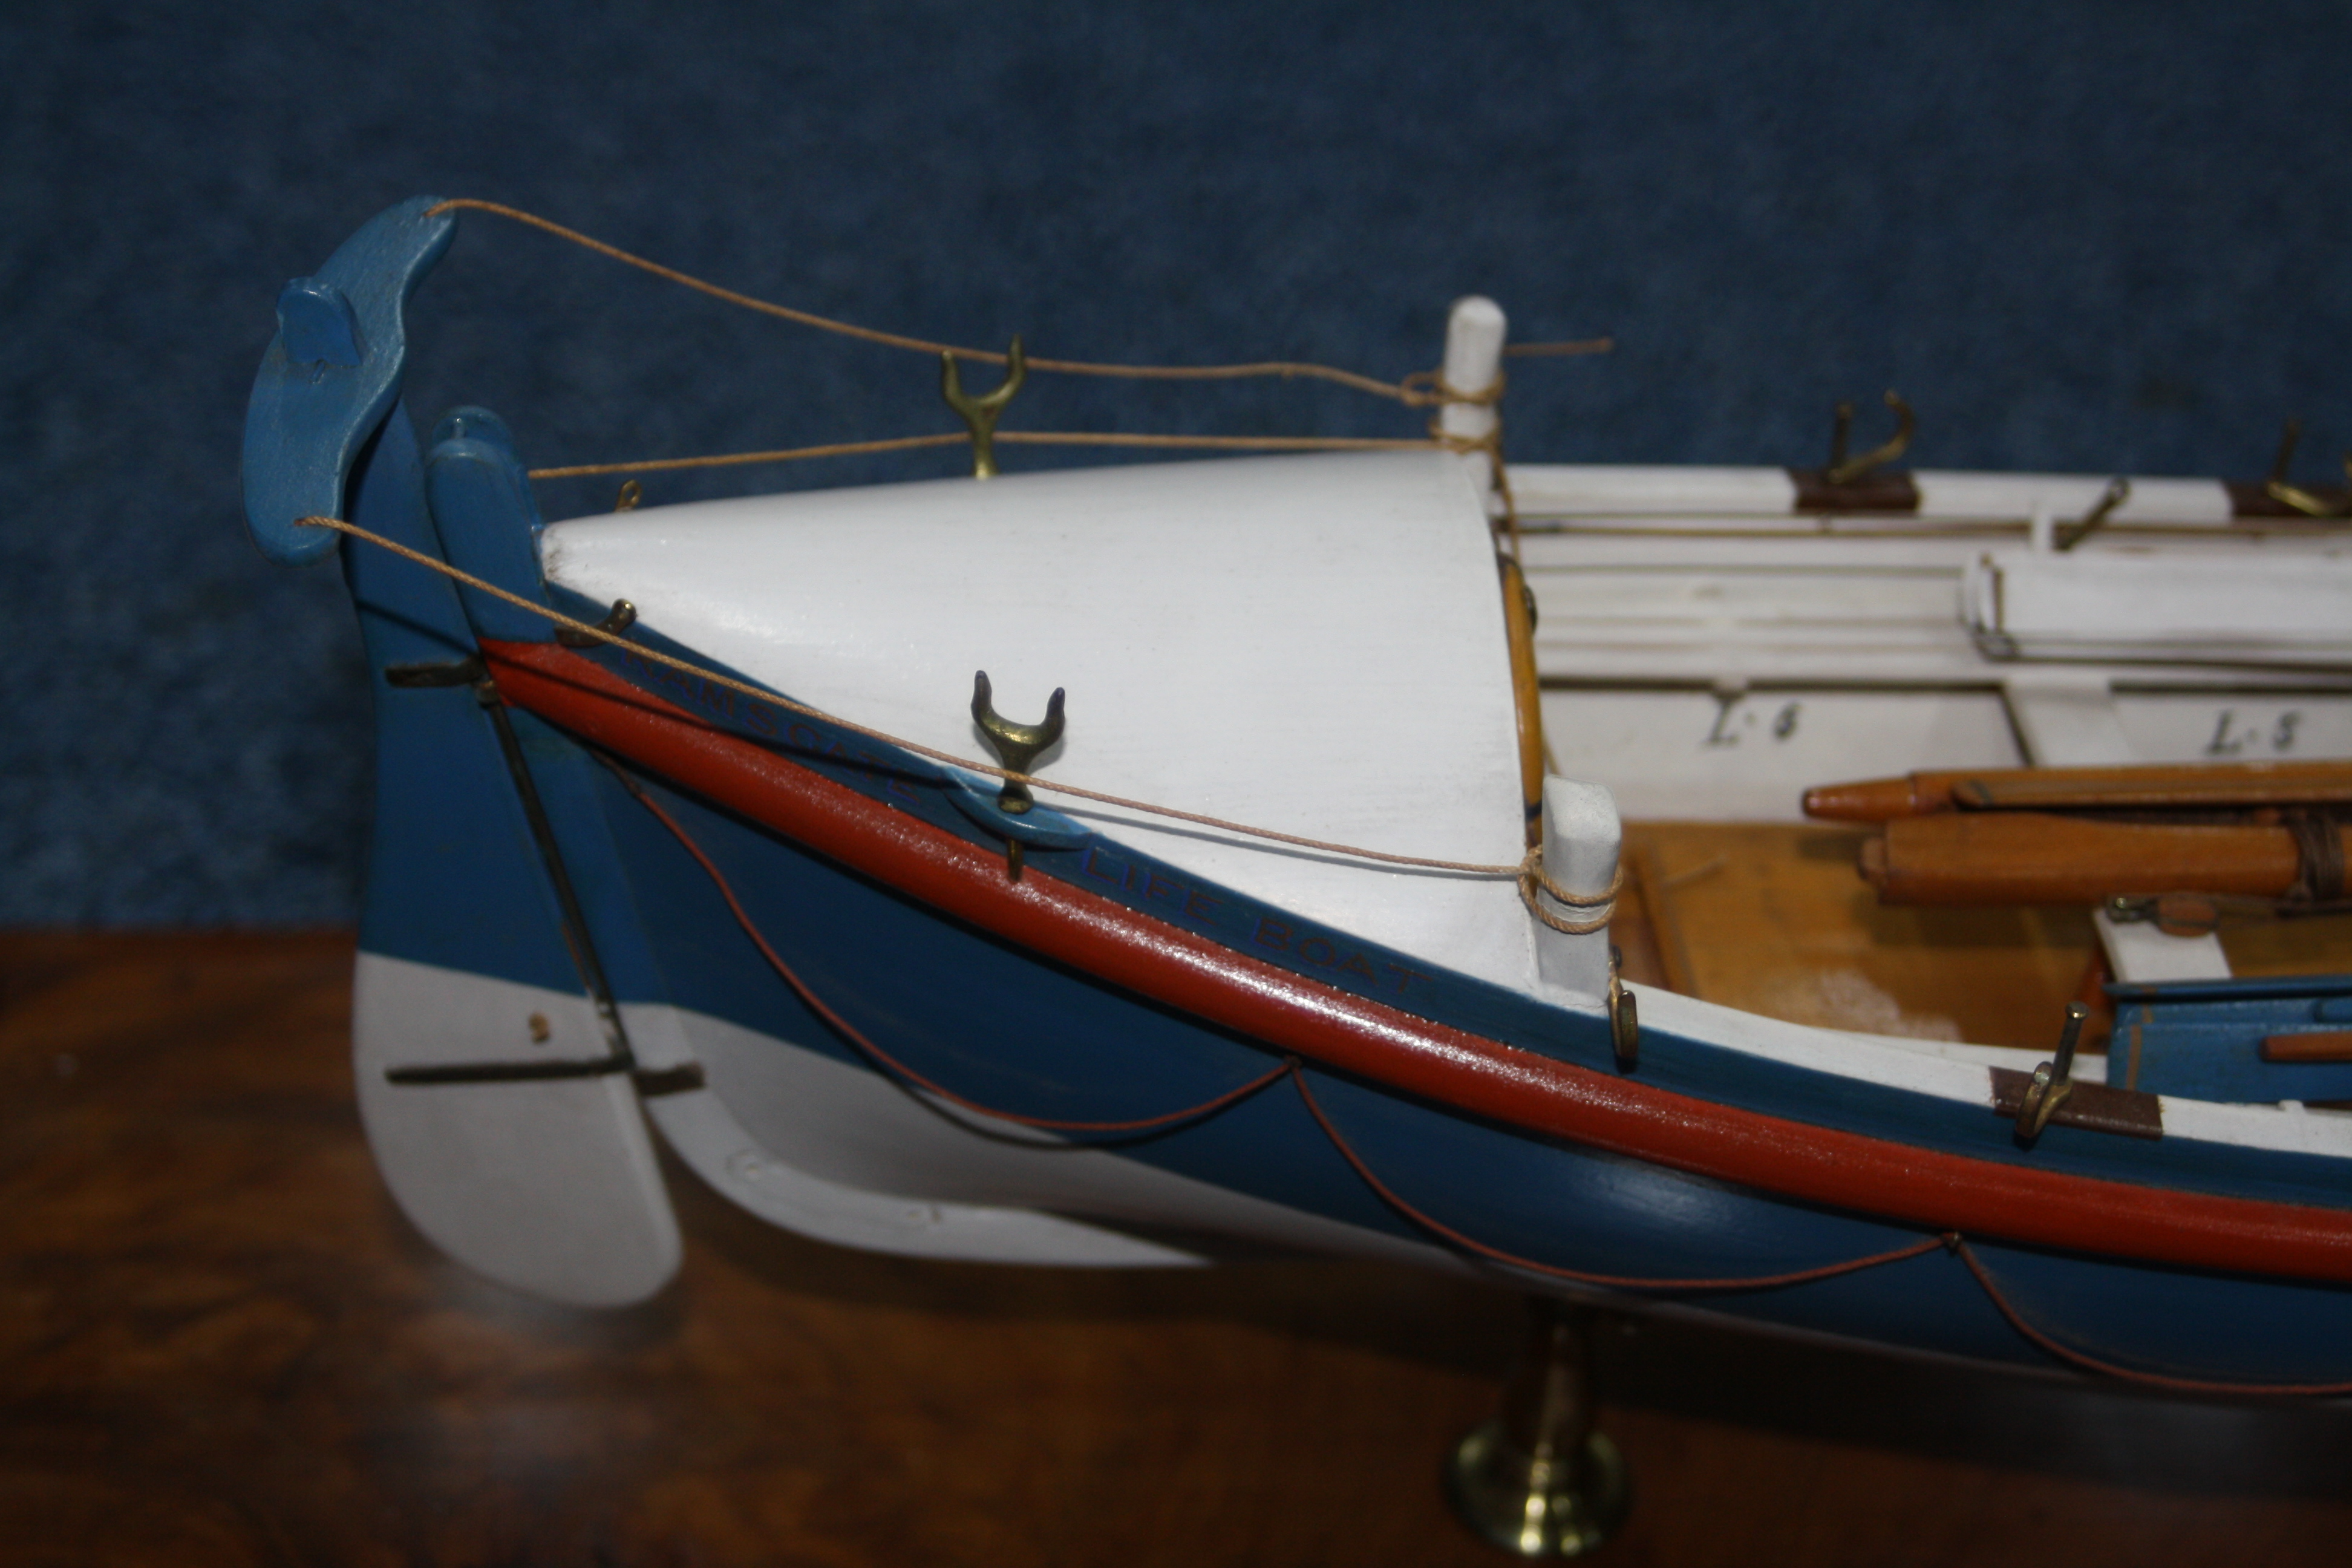 A SCRATCH BUILT WOODEN AND METAL MODEL OF A RAMSGATE LIFE BOAT, 'The Bradford', painted blue and - Image 3 of 6